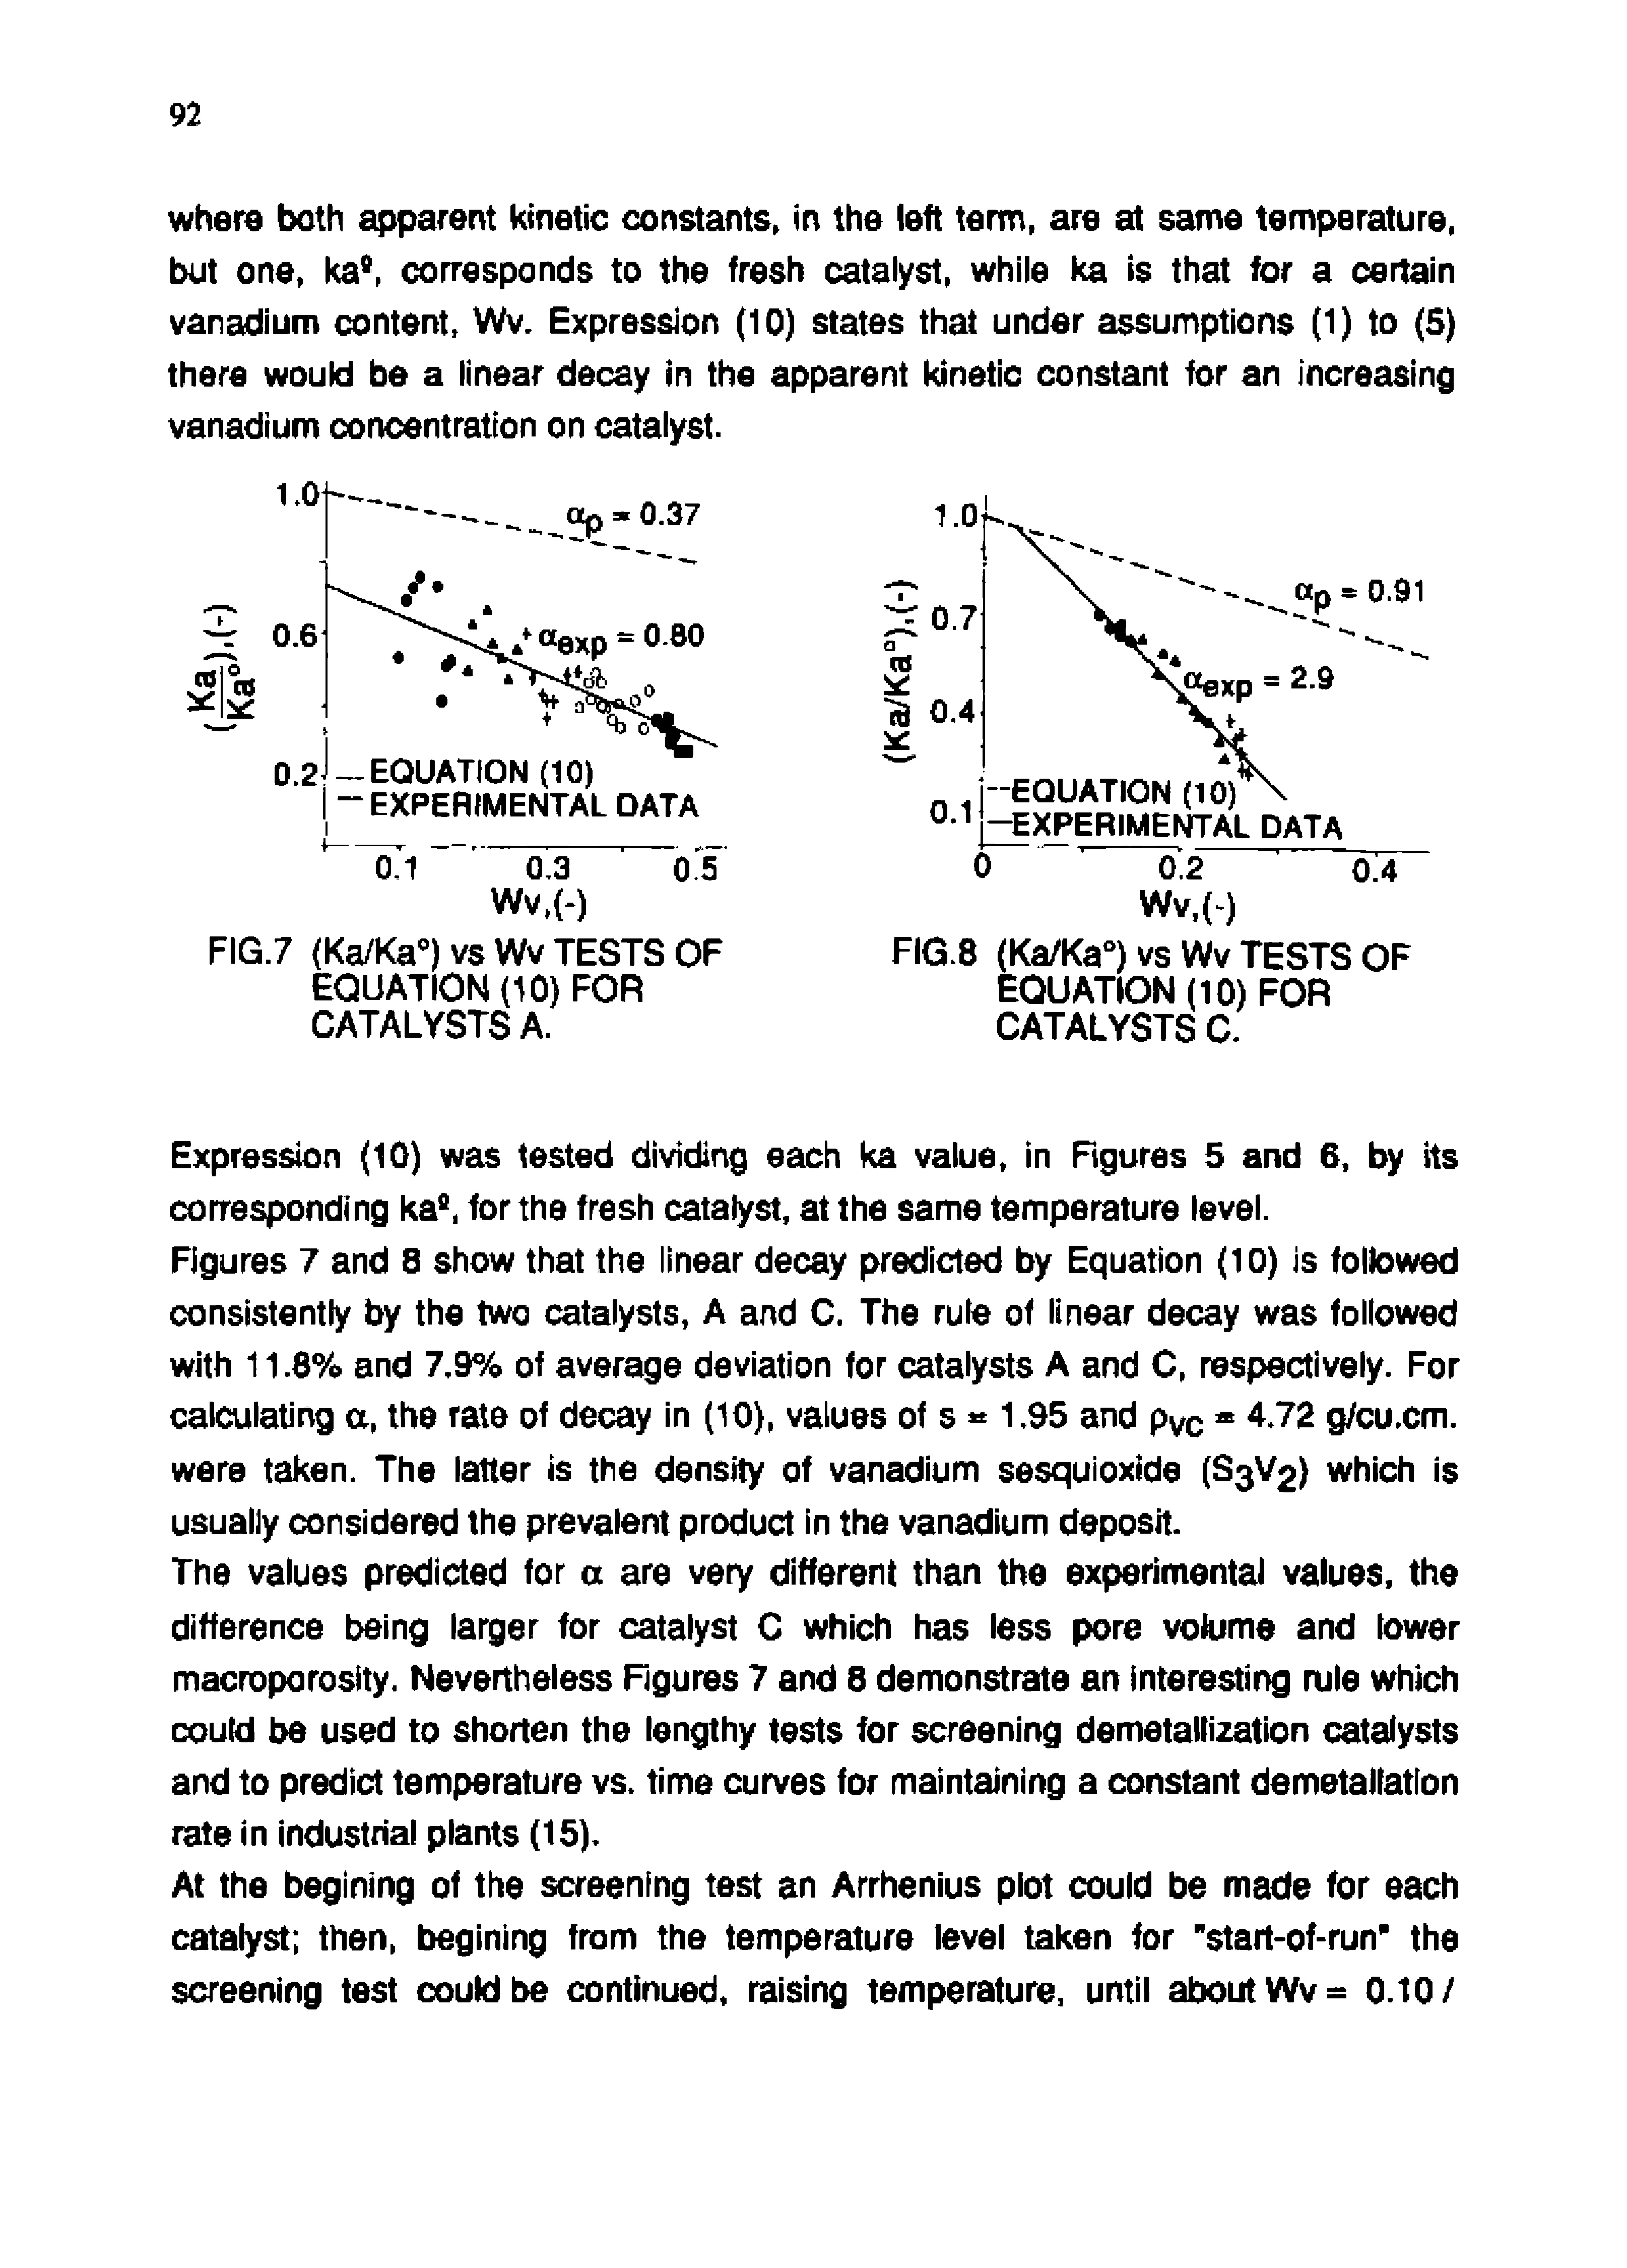 Figures 7 and 8 show that the linear decay predicted by Equation (10) is followed consistently by the two catalysts, A and C. The rule of linear decay was followed with 11.8% and 7,9% of average deviation for catalysts A and C, respectively. For calculating a, the rate of decay in (10), values of s 1,95 and pvc 4,72 g/cu,cm. were taken. The latter is the density of vanadium sesquioxide (S3V2) which Is usually considered the prevalent product in the vanadium deposit.